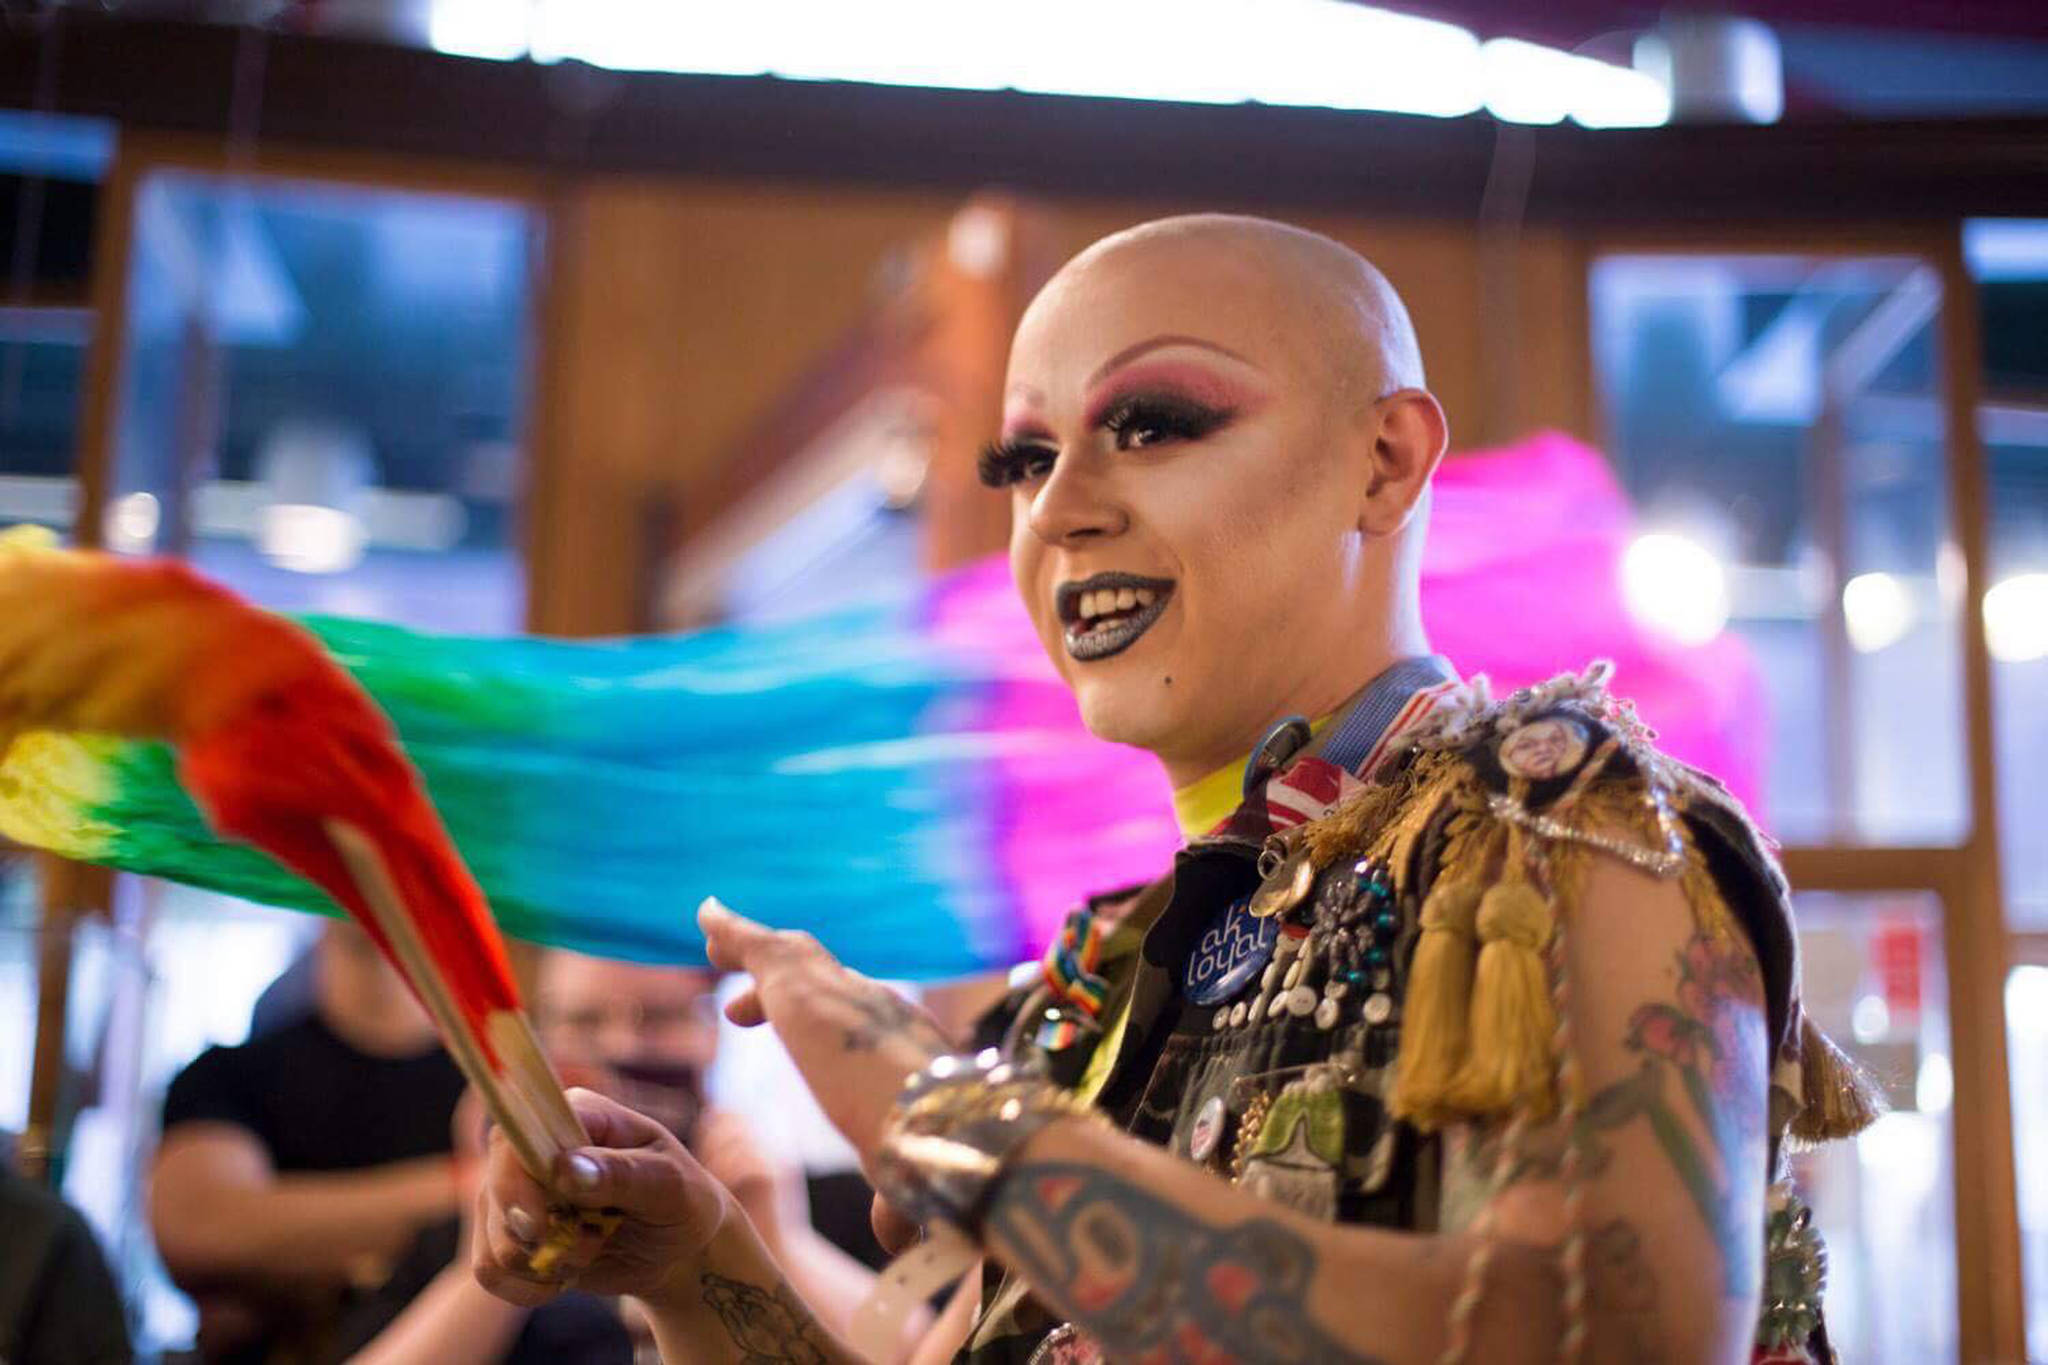 Ricky Tagaban smiles at a Tiny Desk concert at Kindred Post. Tagaban said his work in drag and weaving are both related to gender identity. Photo by Annie Bartholomew.